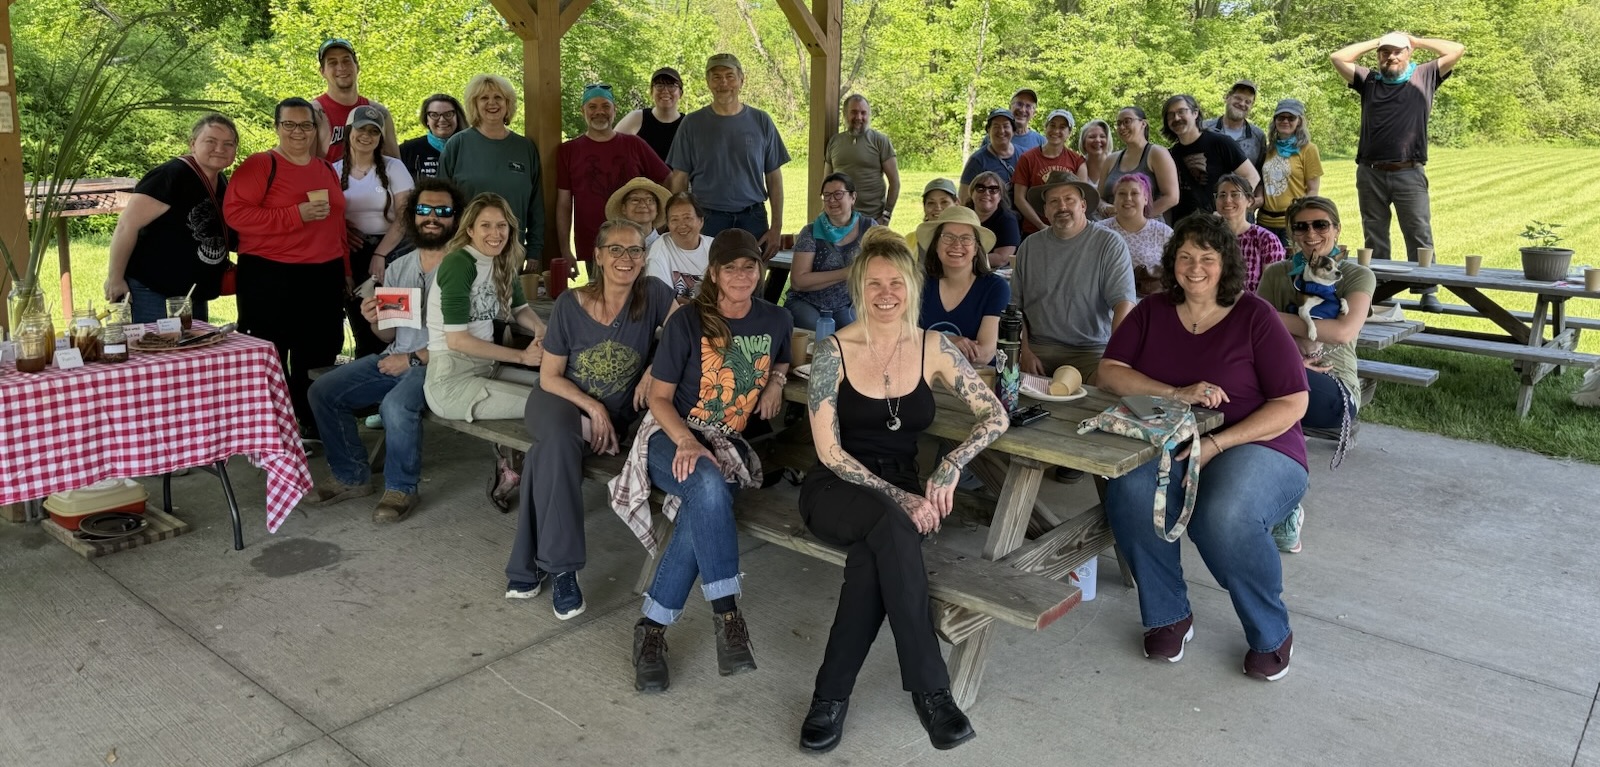 The participants in the fundraiser for the Ohio Wild Food Fest pose for a group photo.